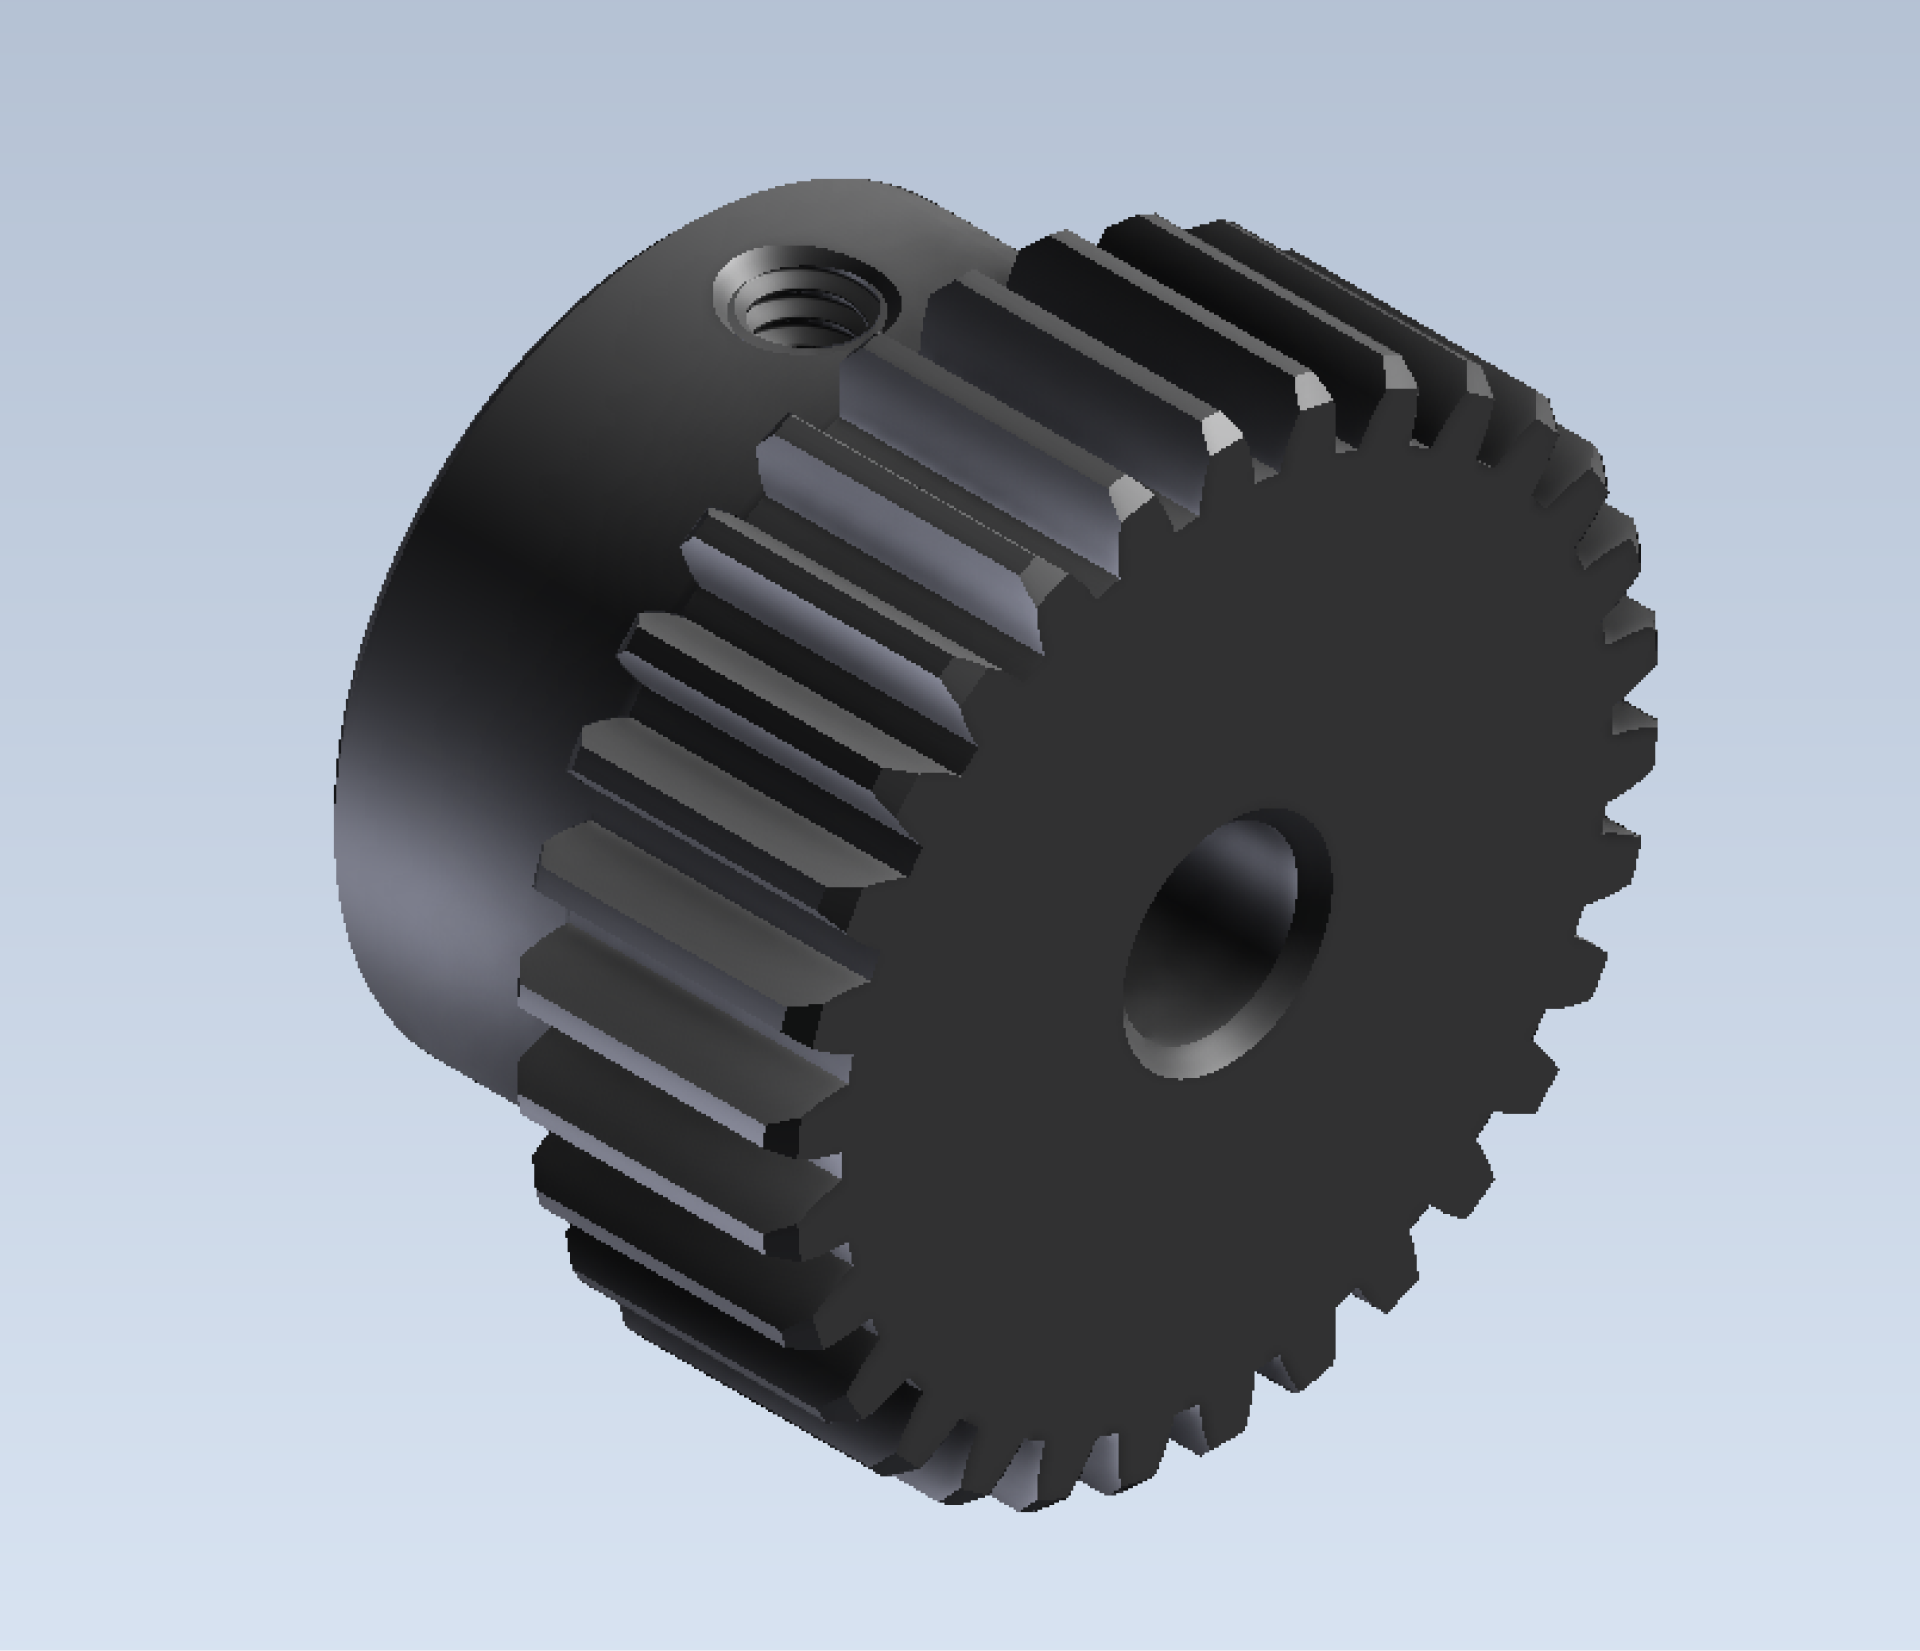 Gear set for 3D print and engineering applications - CAD Files, DWG files,  Plans and Details